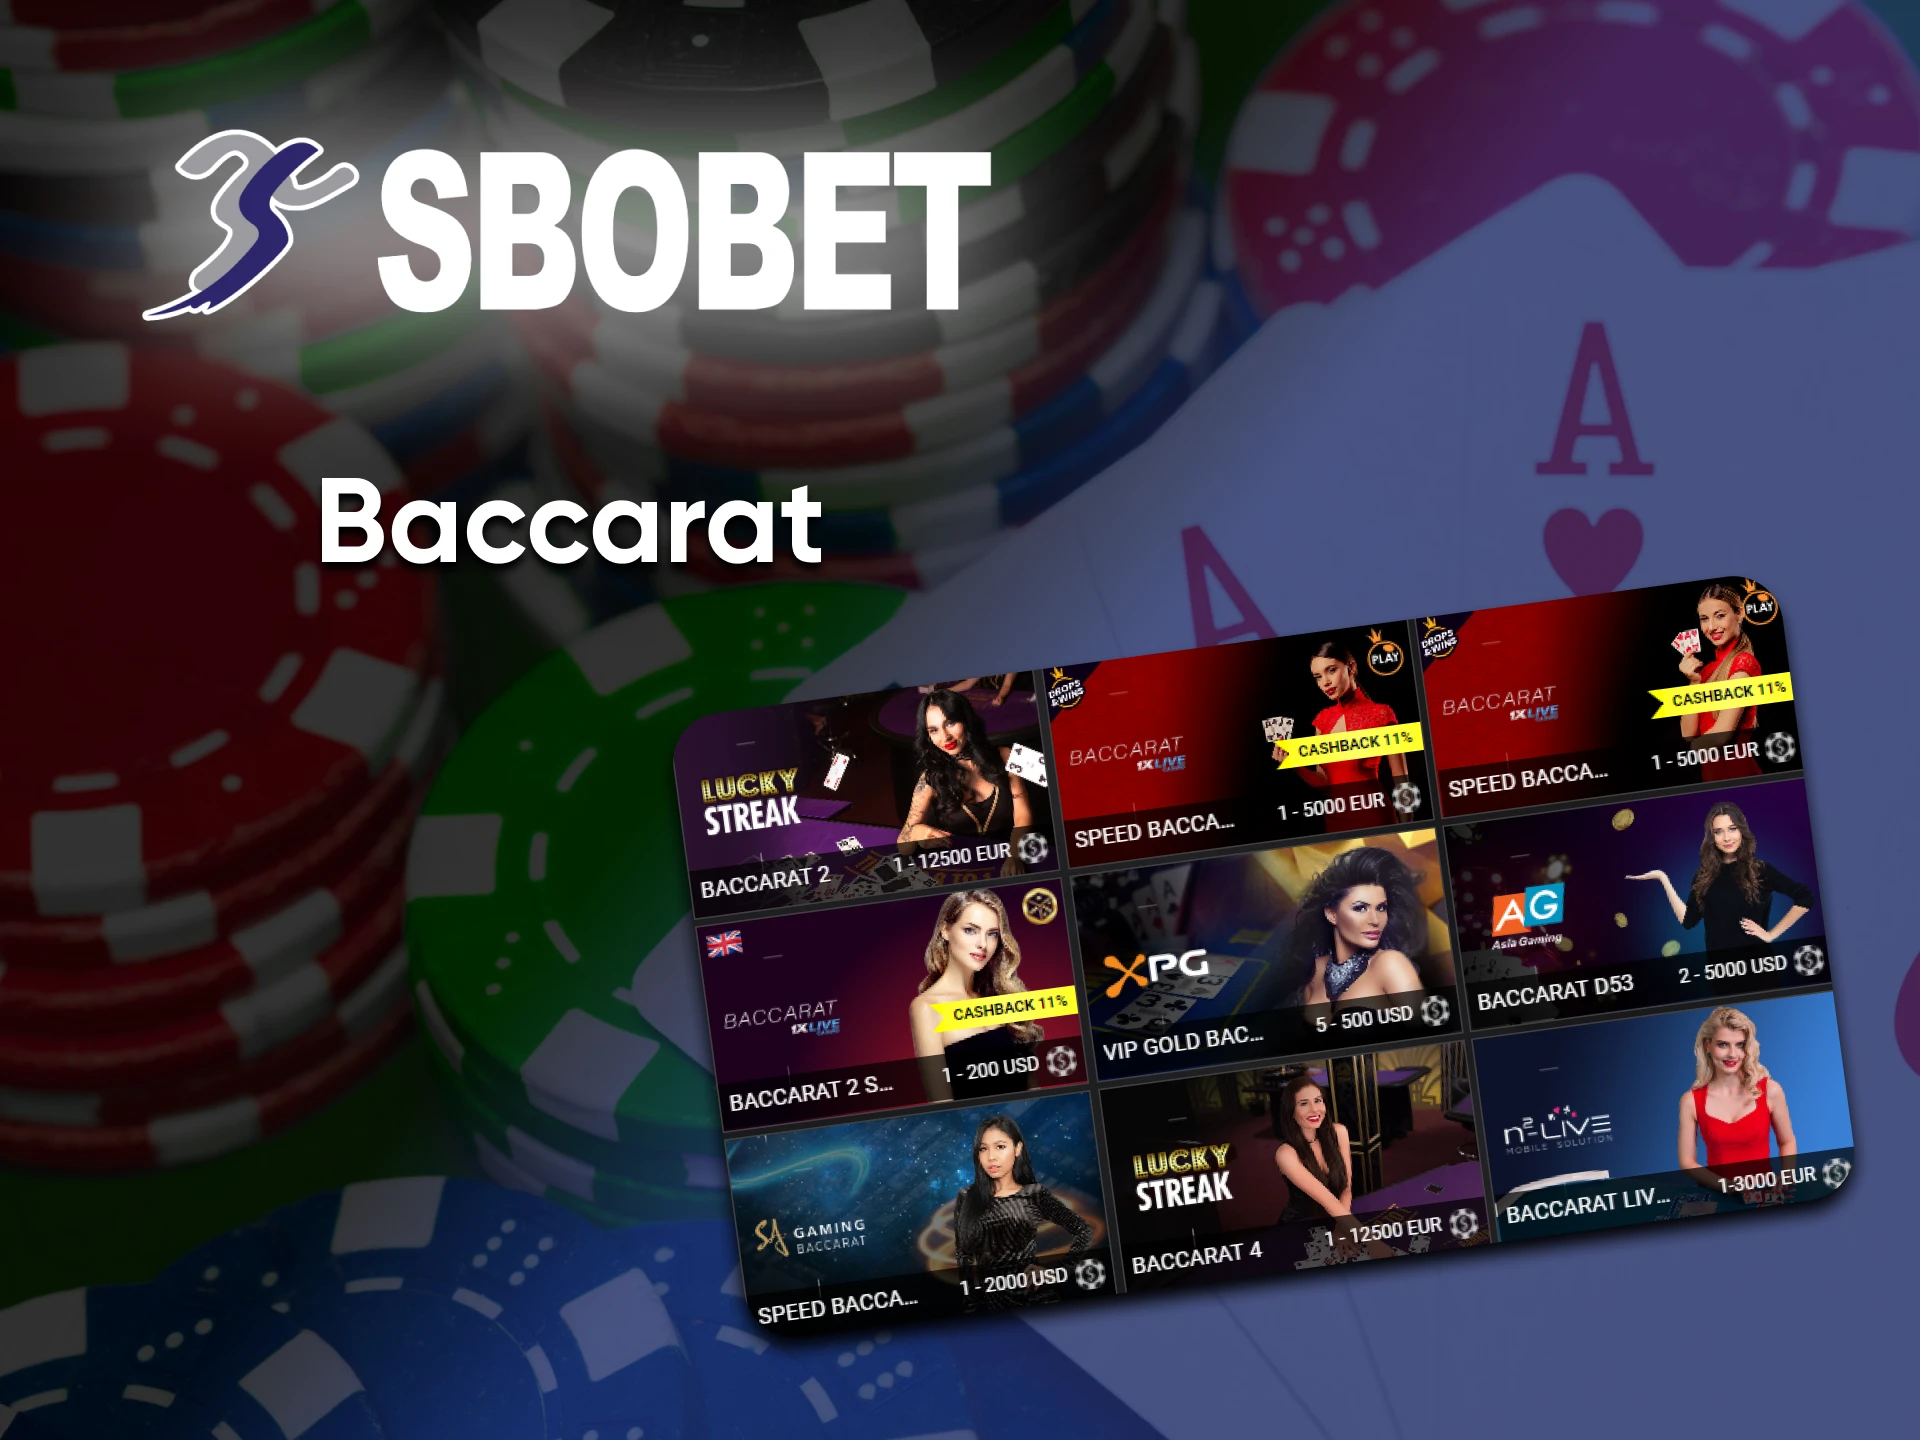 On the Sbobet site, you can play games like Baccarat.